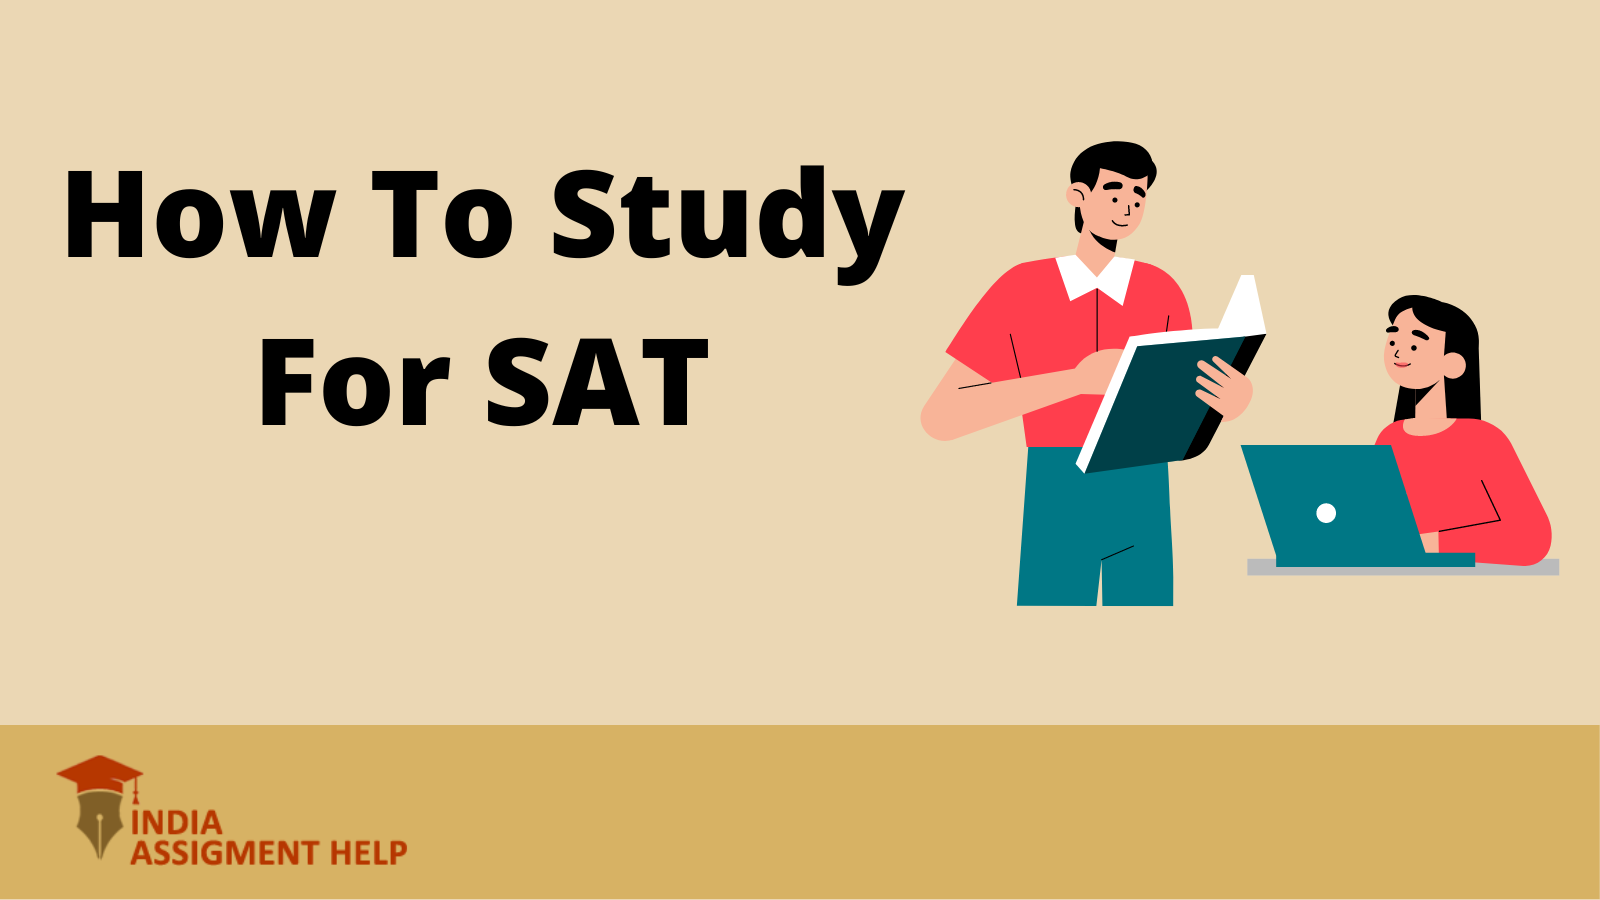 How To Study For SAT